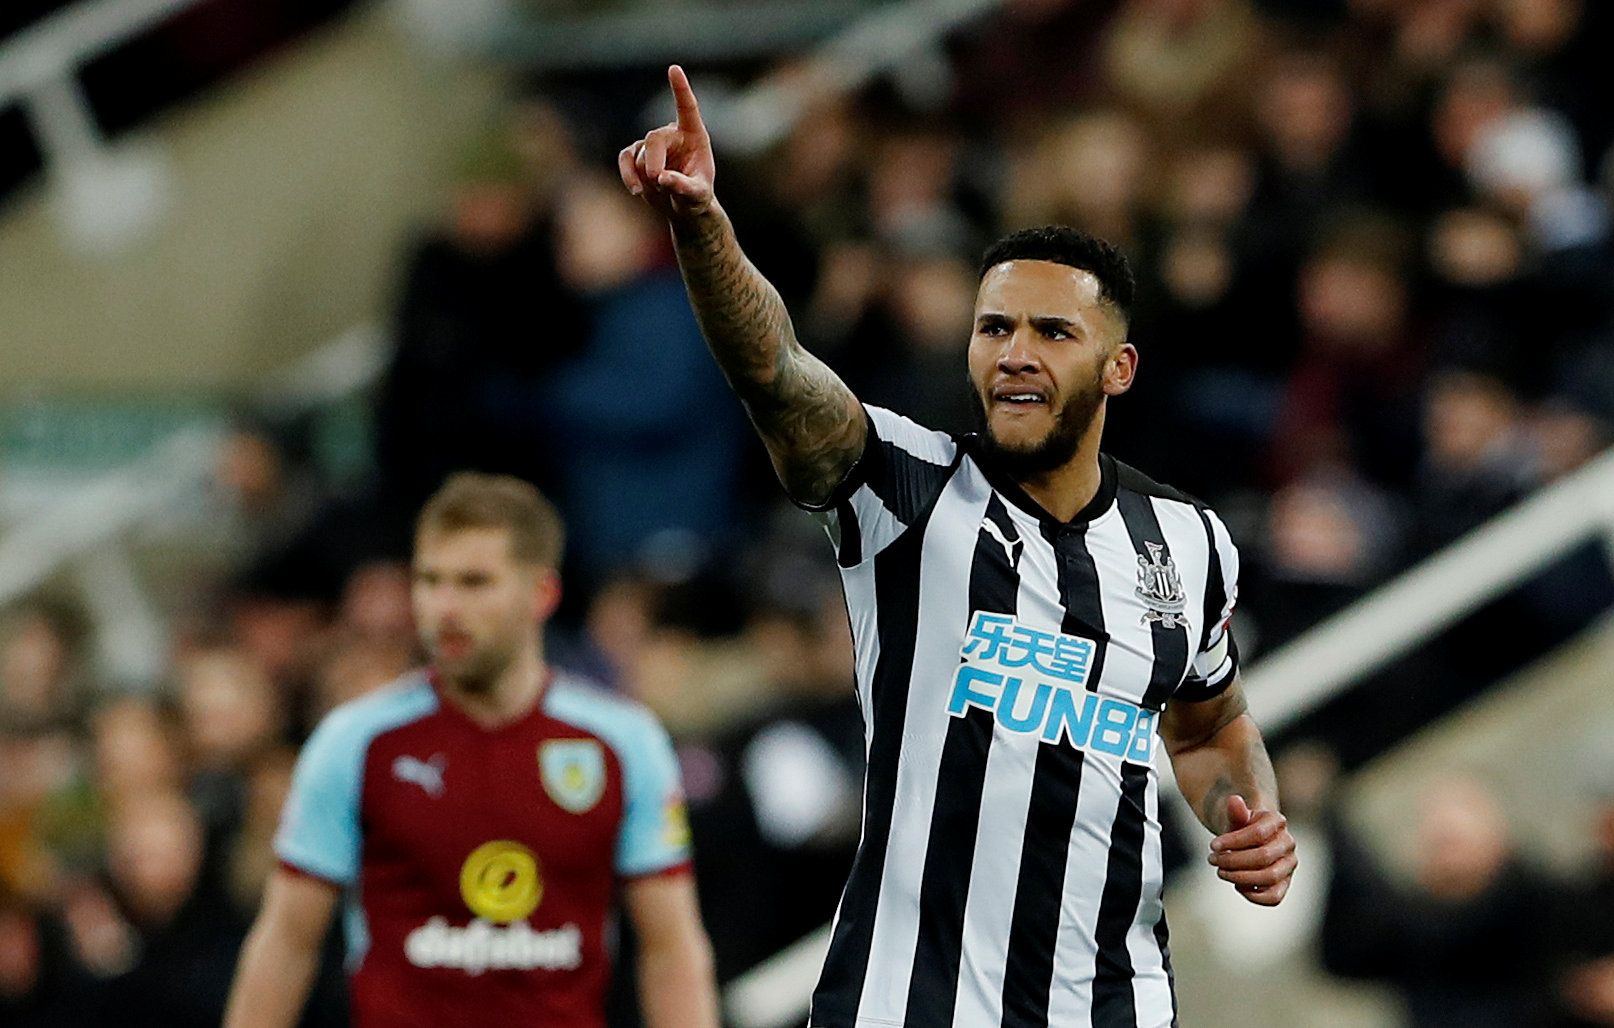 Soccer Football - Premier League - Newcastle United vs Burnley - St James' Park, Newcastle, Britain - January 31, 2018   Newcastle United's Jamaal Lascelles celebrates scoring their first goal    Action Images via Reuters/Lee Smith    EDITORIAL USE ONLY. No use with unauthorized audio, video, data, fixture lists, club/league logos or "live" services. Online in-match use limited to 75 images, no video emulation. No use in betting, games or single club/league/player publications.  Please contact y